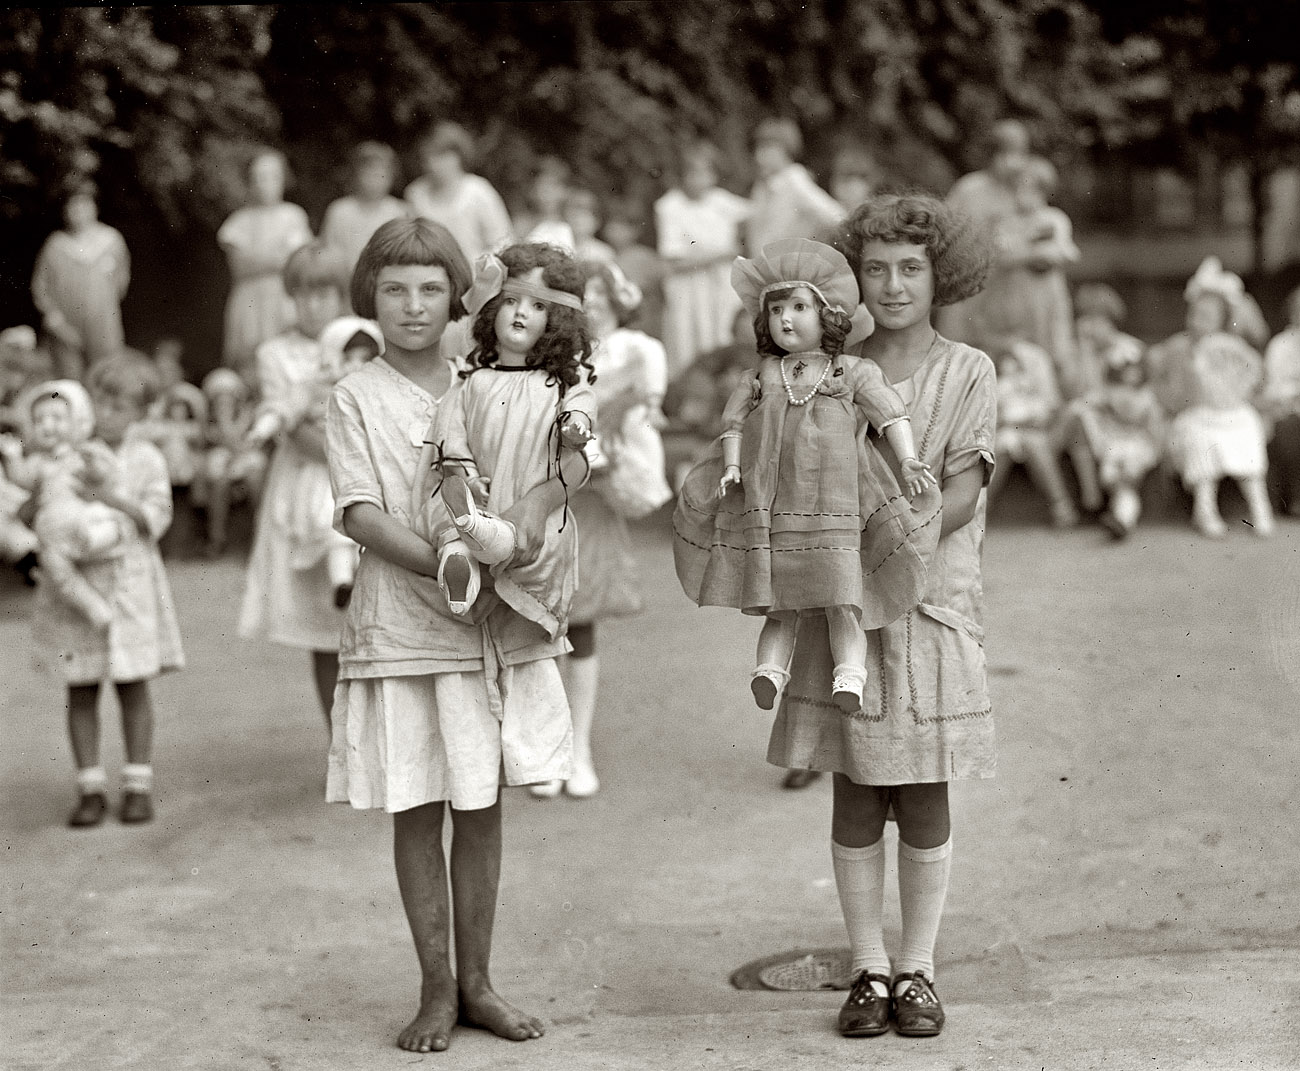 Washington, D.C., 1923. "Girls with dolls." View full size. National Photo Co.